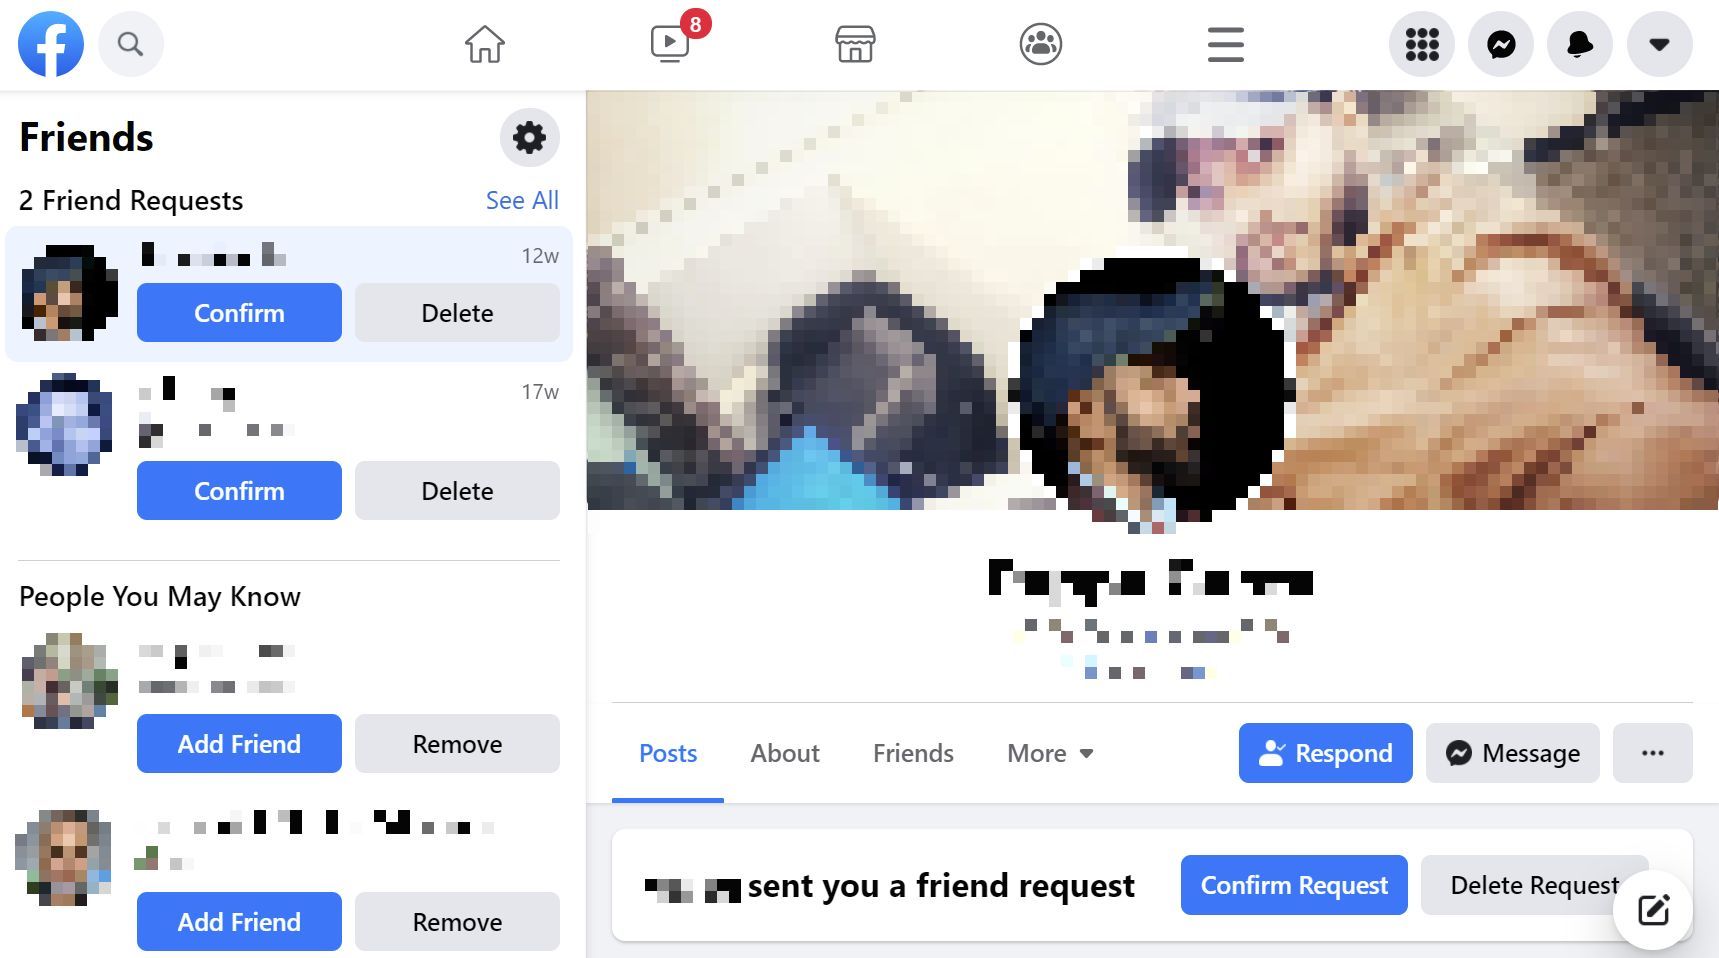 Overview of received friend requests and people you may know on Facebook.